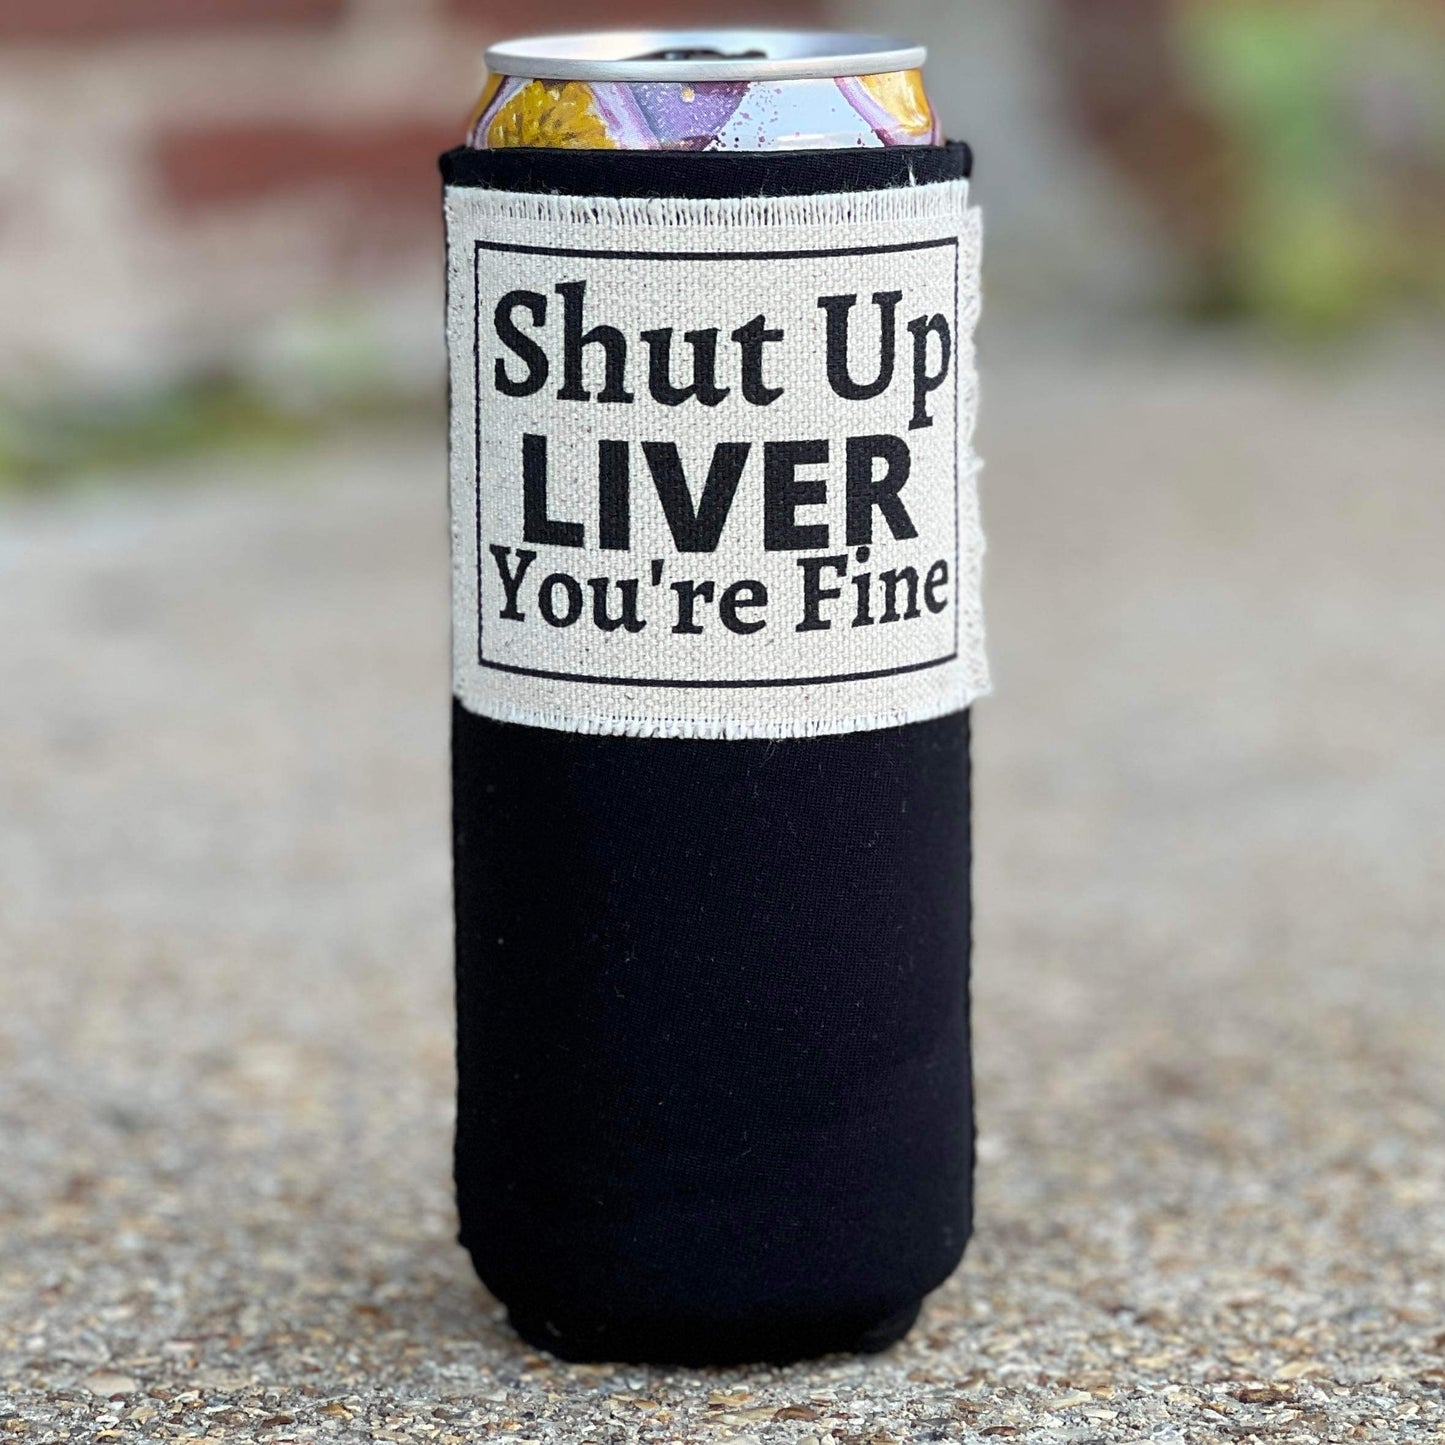 Shut Up Liver Youre Fine Slim Coozie